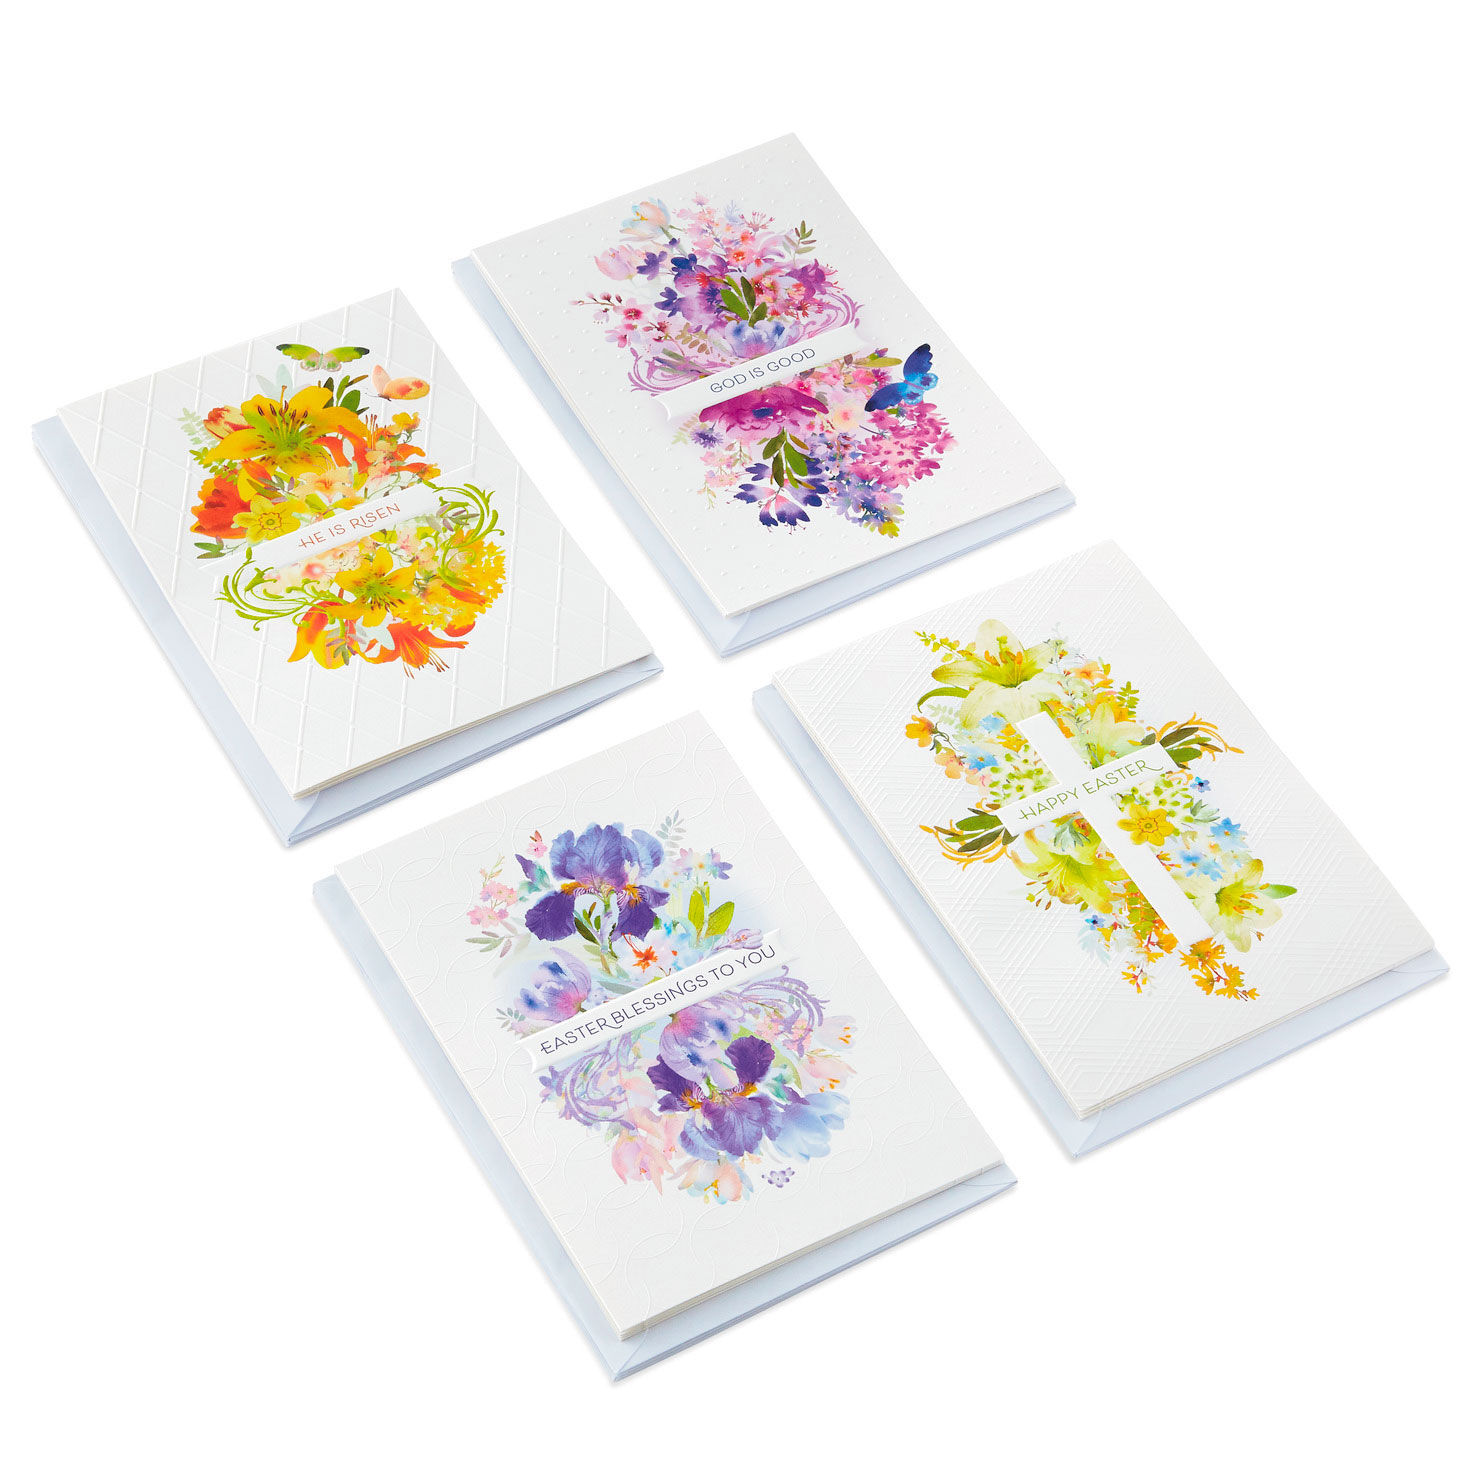 Watercolor Floral Boxed Easter Cards, Pack of 16 for only USD 9.99 | Hallmark